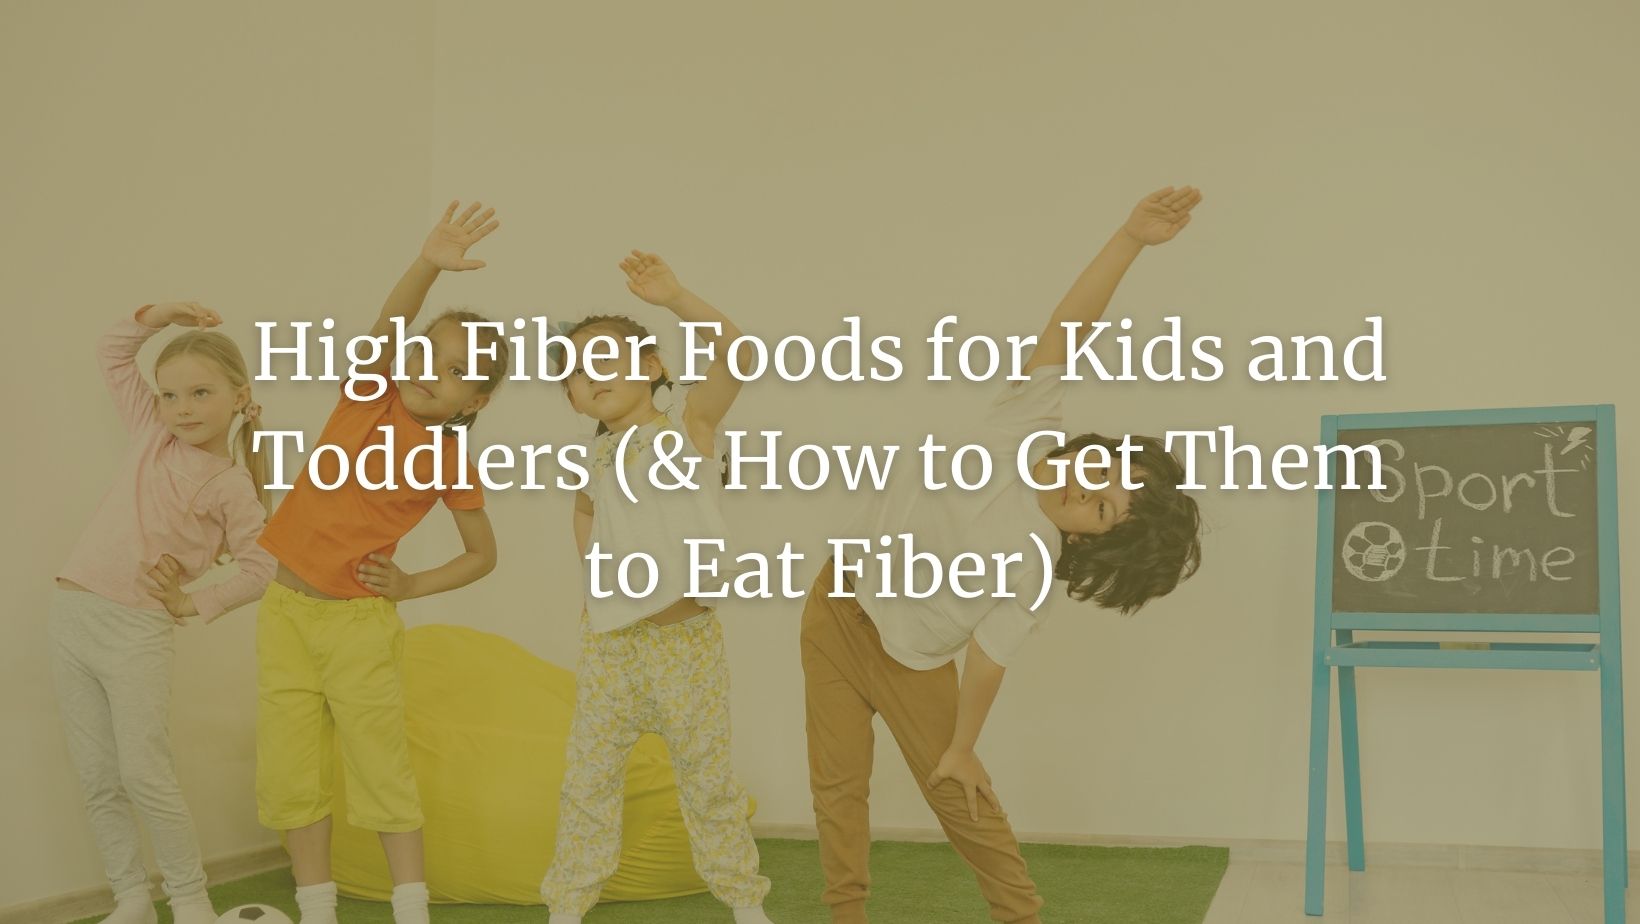 High-fiber foods for kids featured image